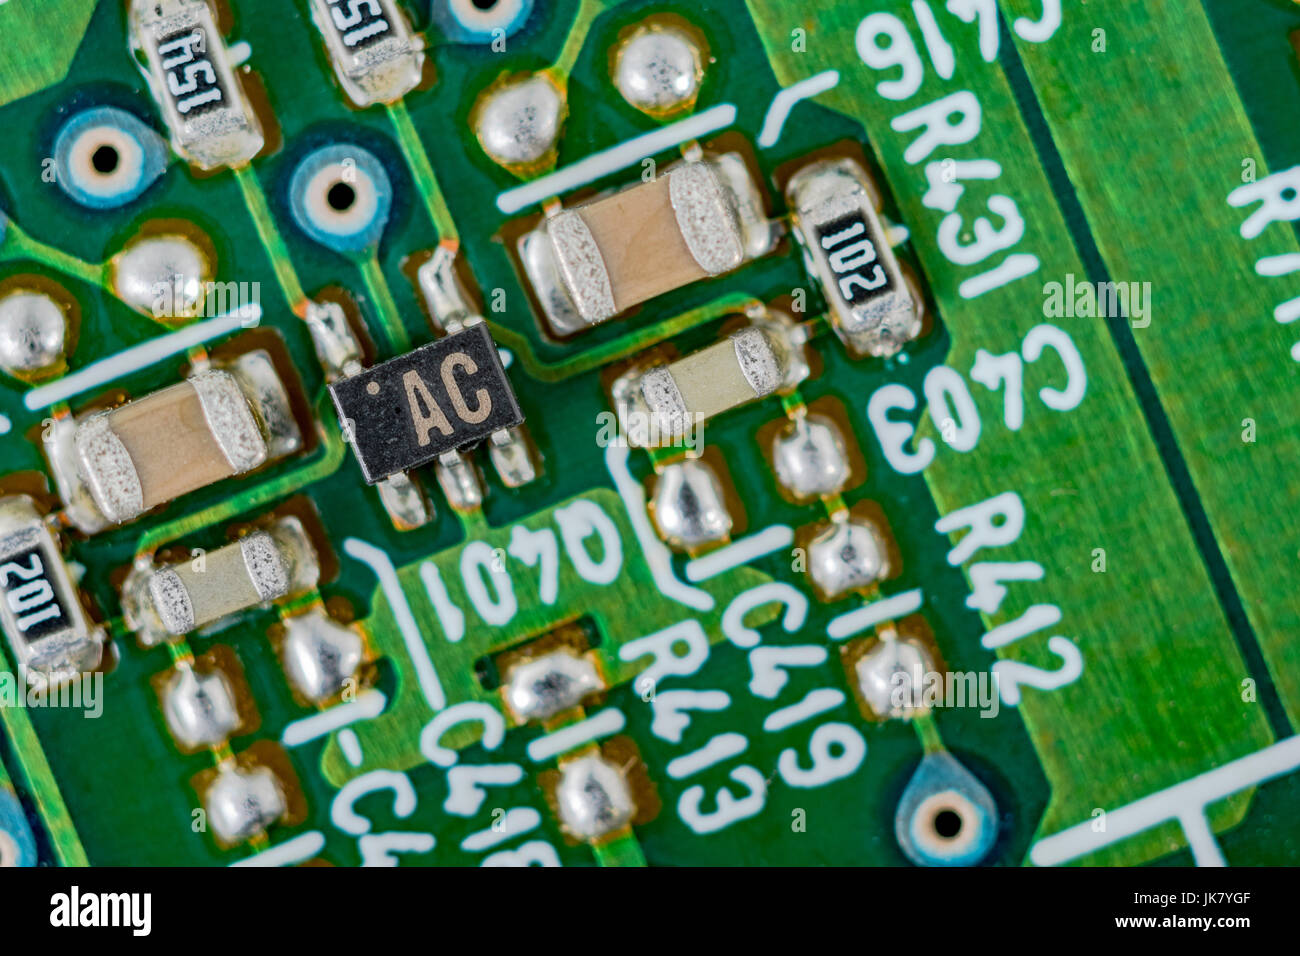 Surface mount technology (SMT) components on a green printed circuit board. Wiring inside computer, circuit close up, detail of a circuit board. Stock Photo